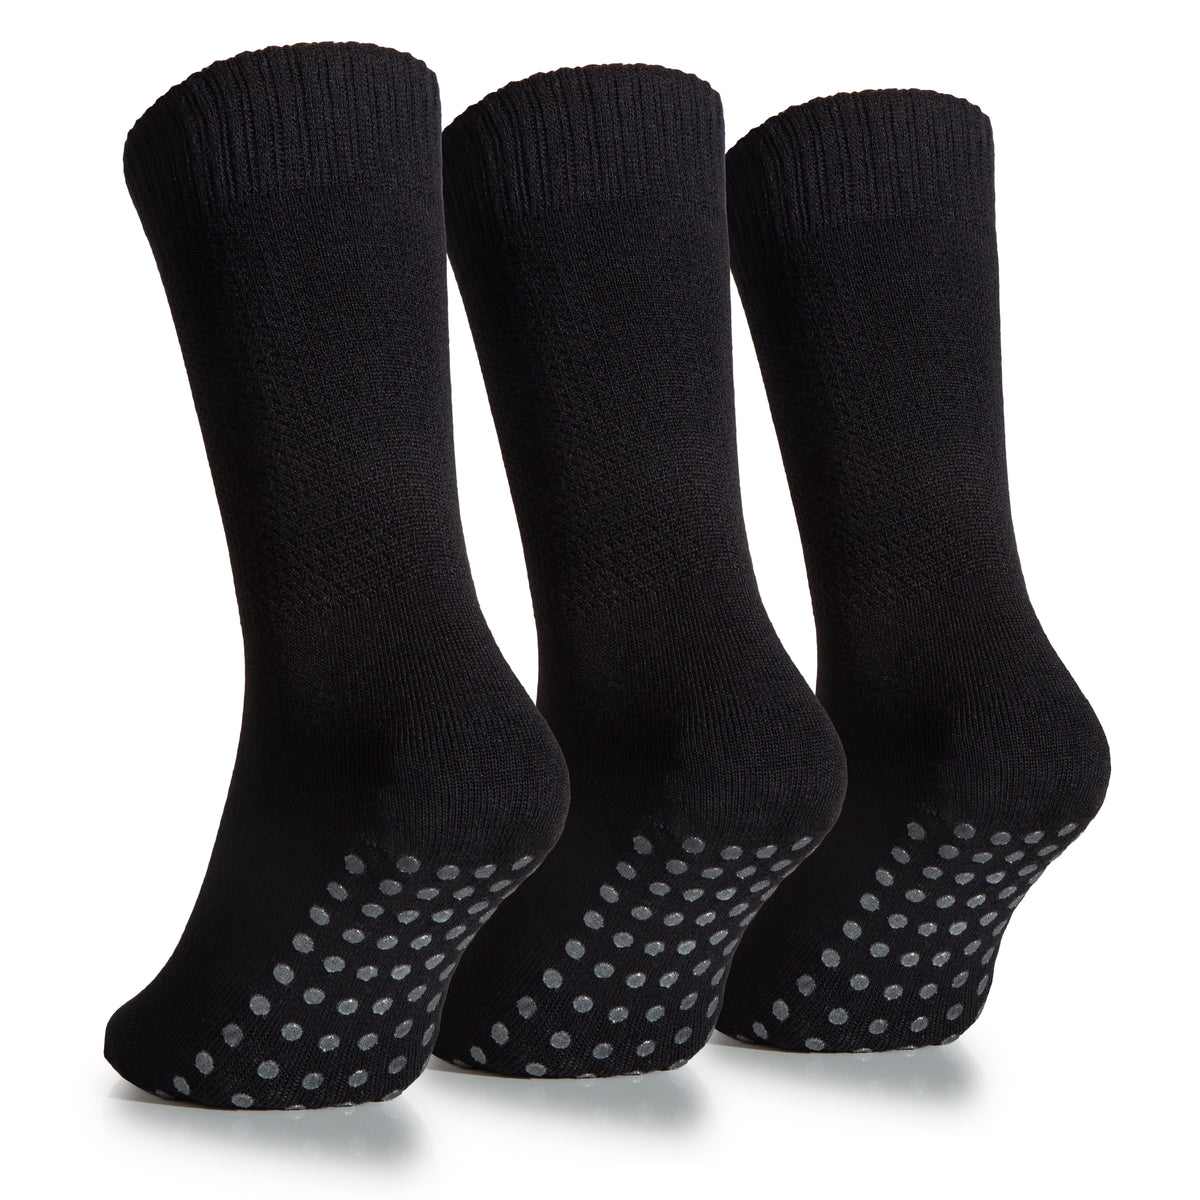 In the image, you can see three Women's Bamboo Diabetic Ankle Non Slip Grip Socks. The socks are black and have dots on them.